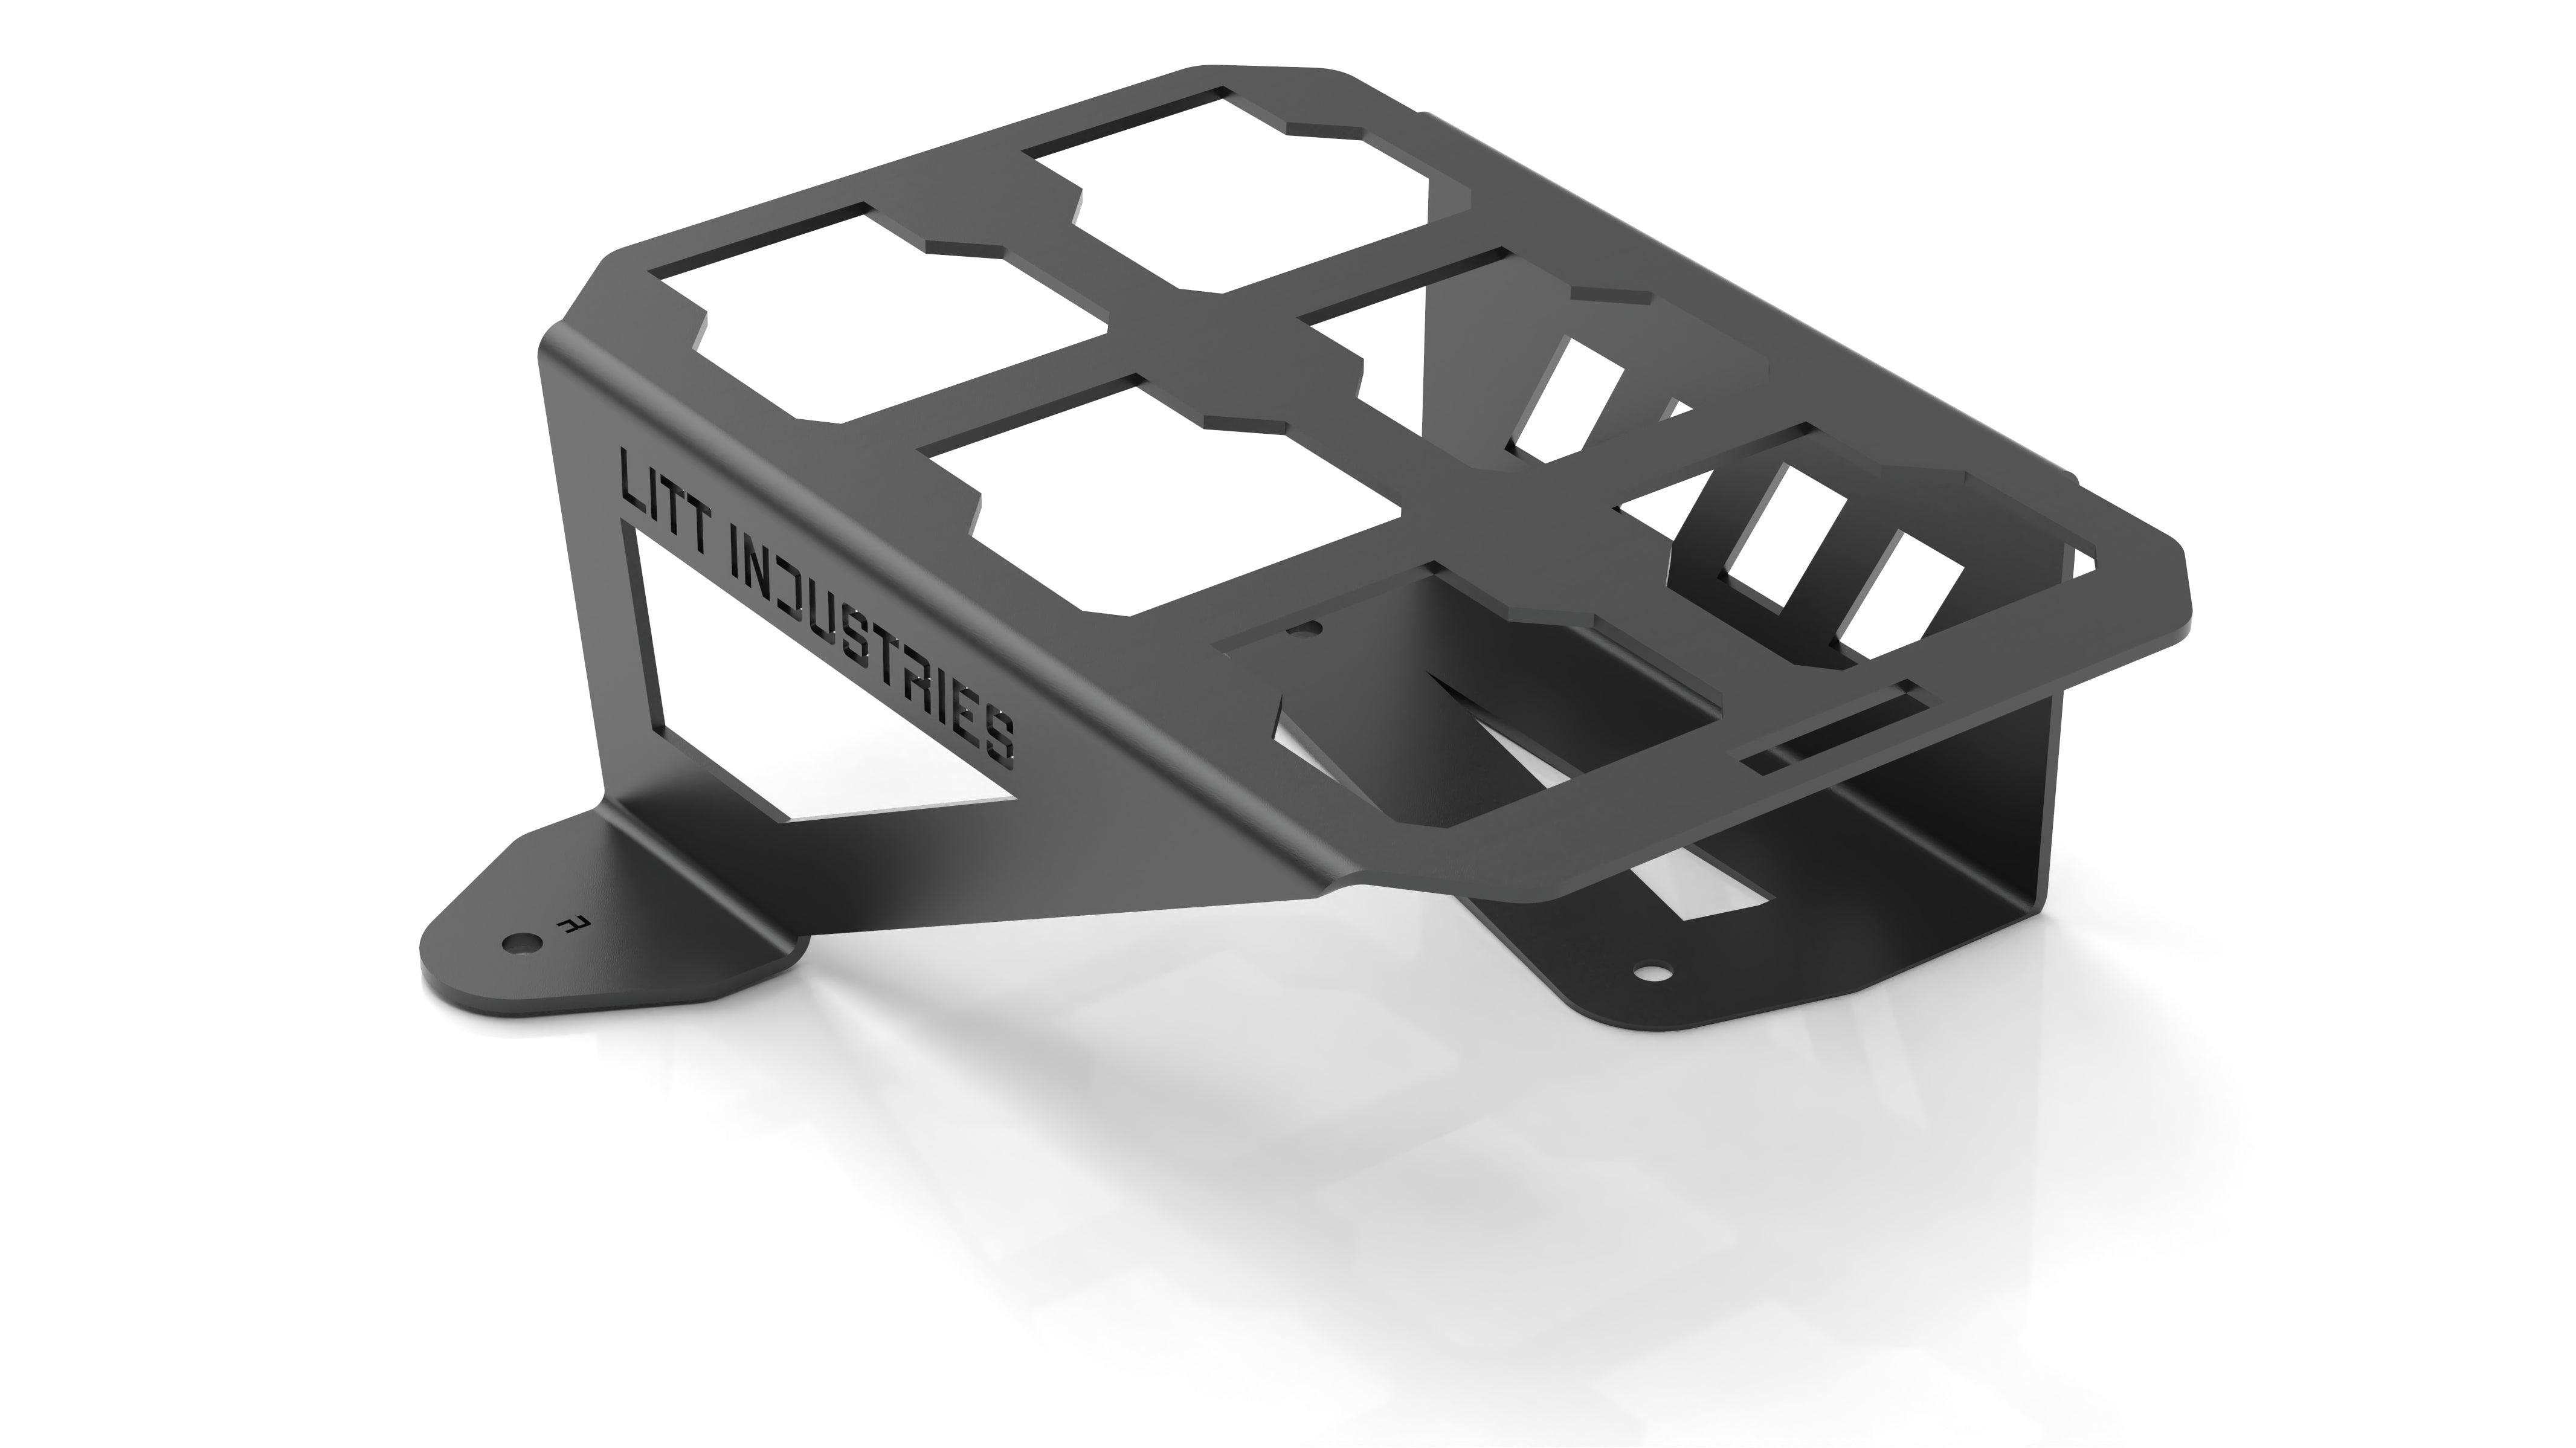 Litt Industries single Milwaukee packout mounts for the can am maverick x3 passengers side or drivers side options best toolbox mounts safe and secure